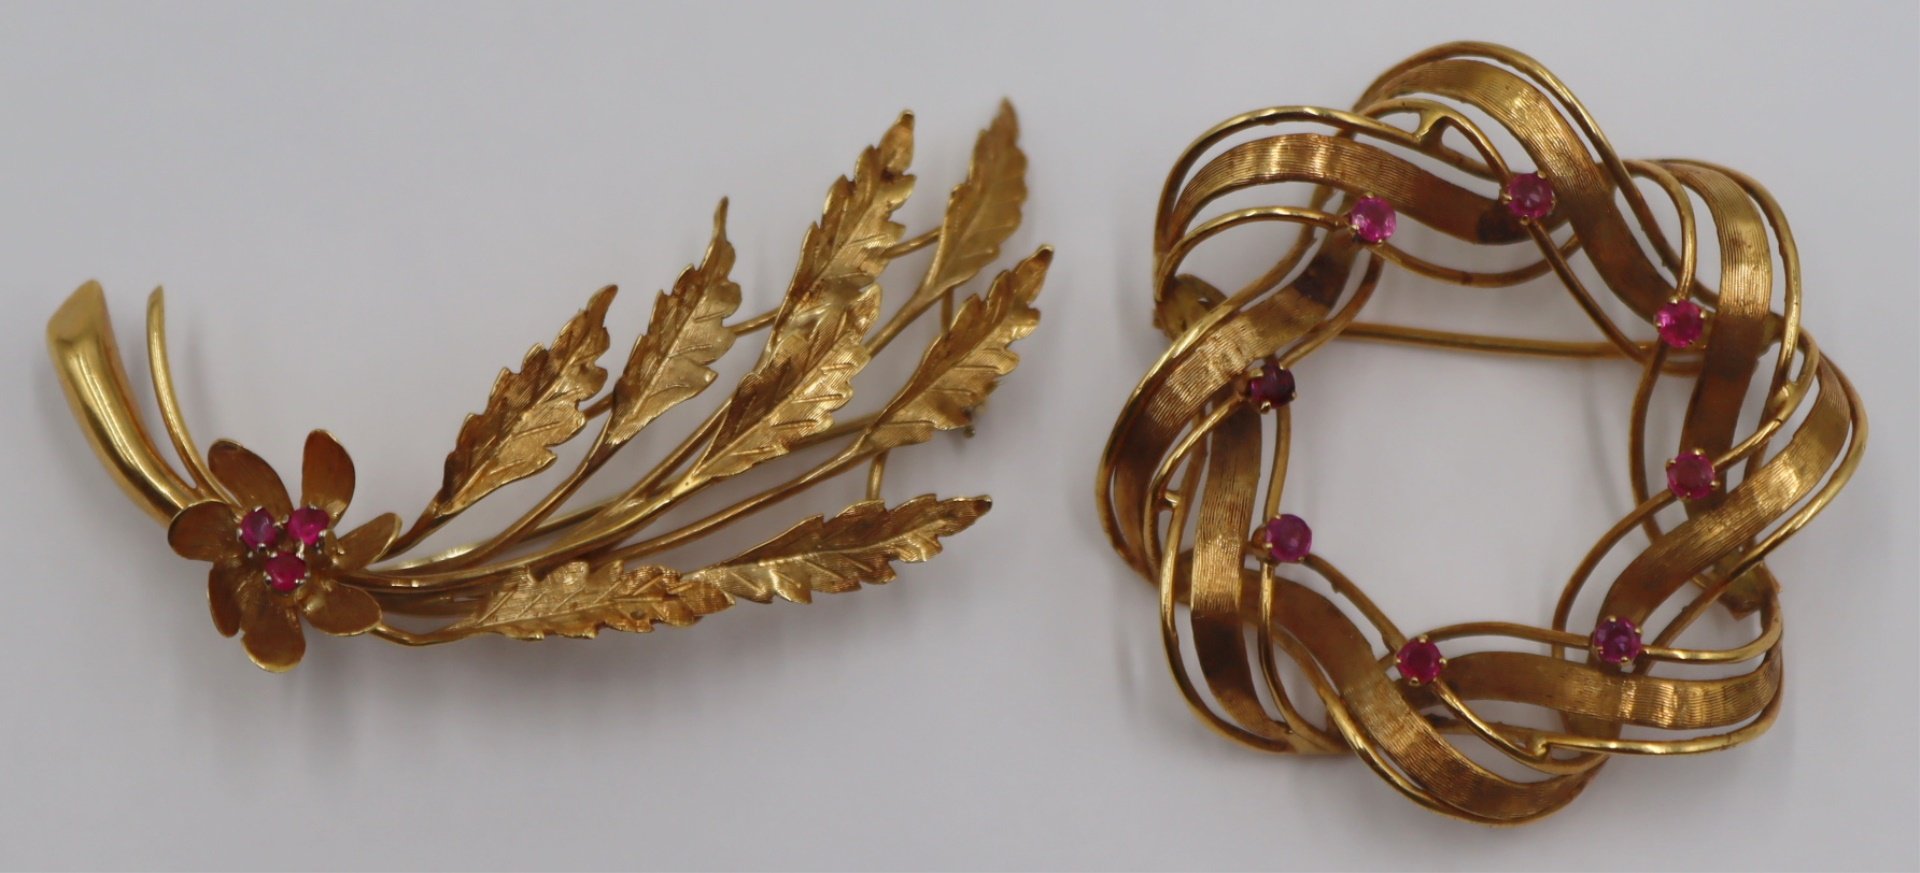 JEWELRY 2 18KT GOLD AND RUBY 3b3878